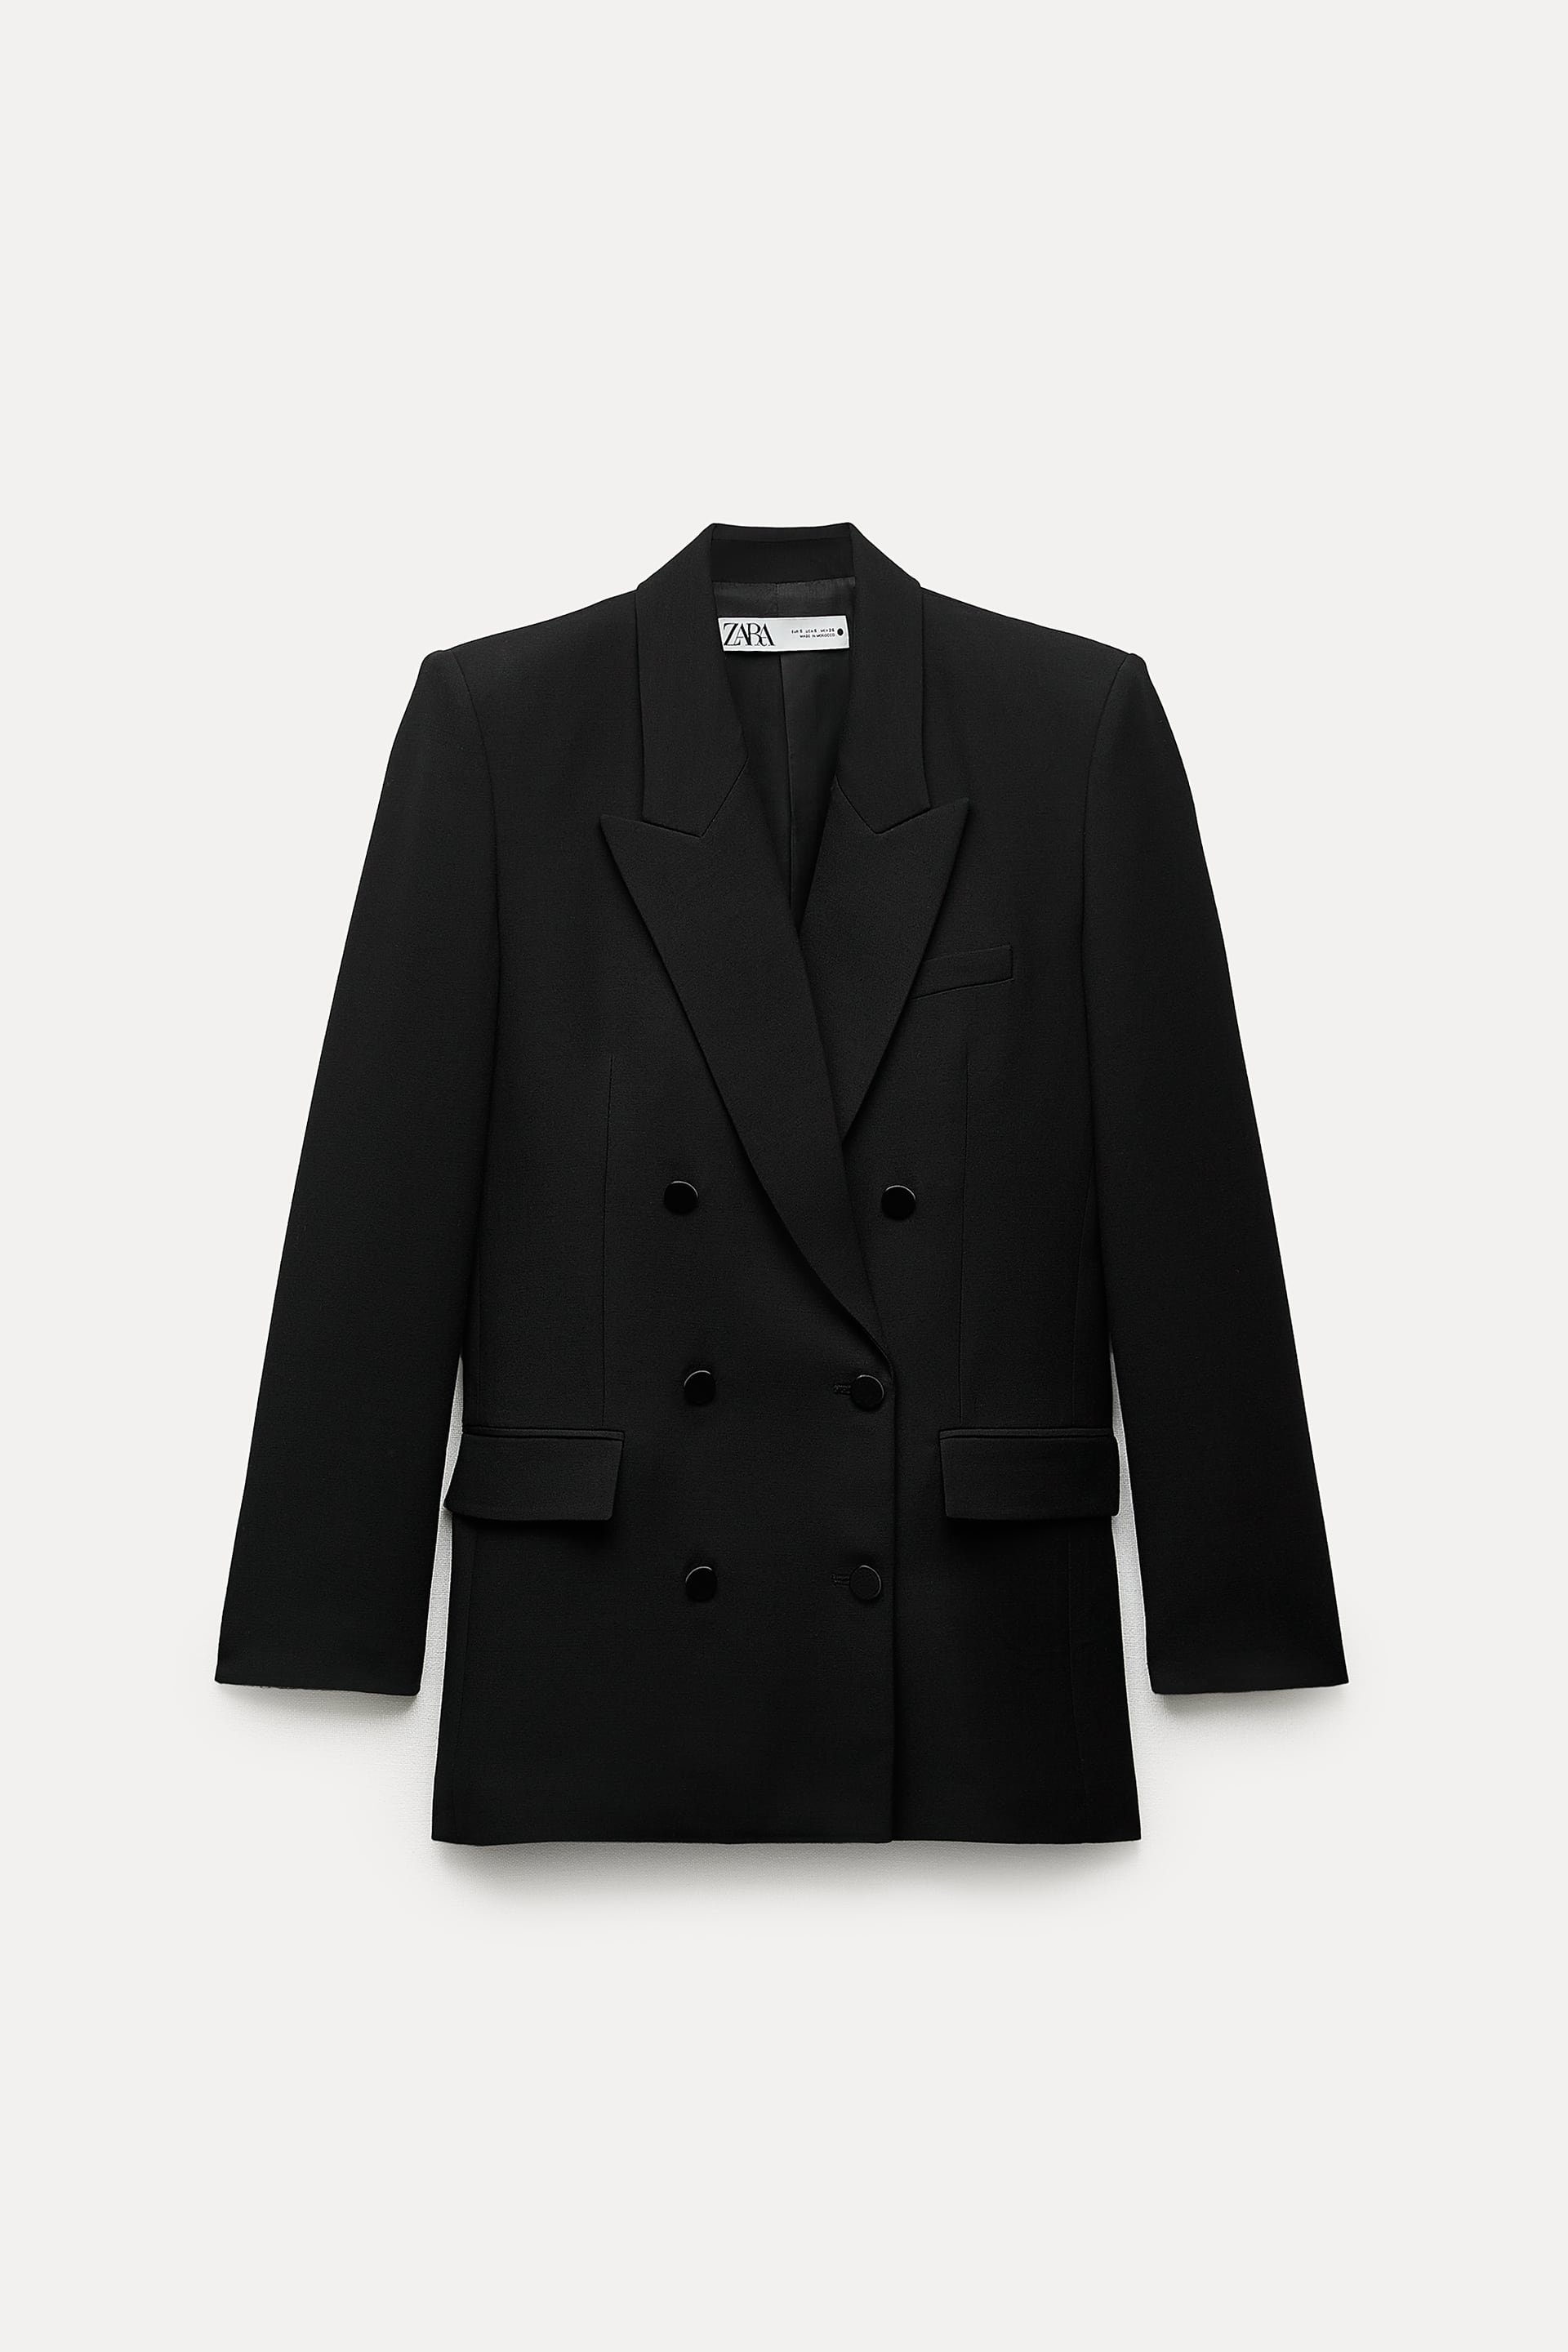 Zara ZW COLLECTION STRAIGHT FIT DOUBLE-BREASTED BLAZER.jpg